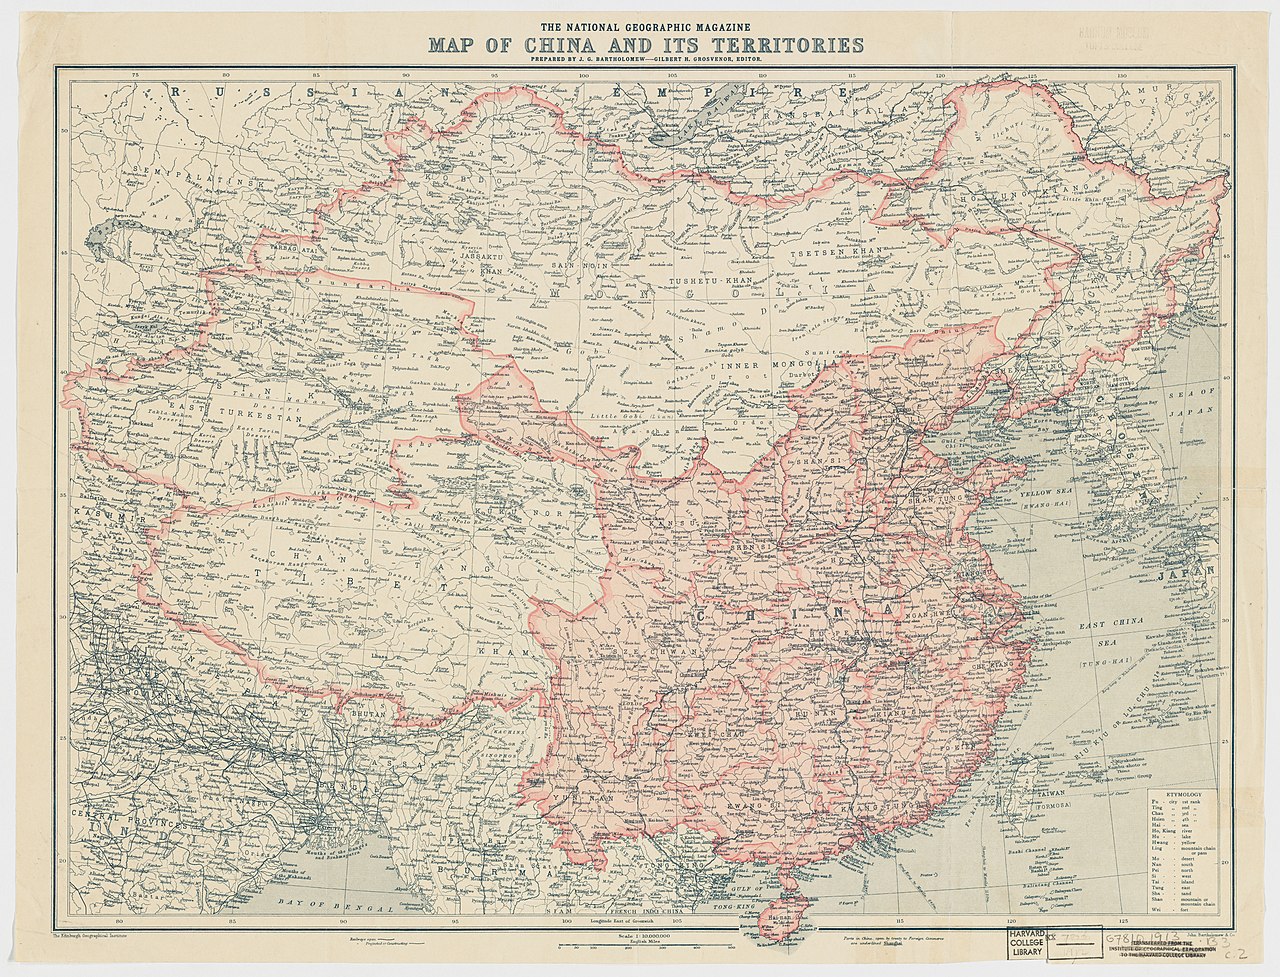 File:1912 China map from National Geographic.jpg - Wikimedia Commons